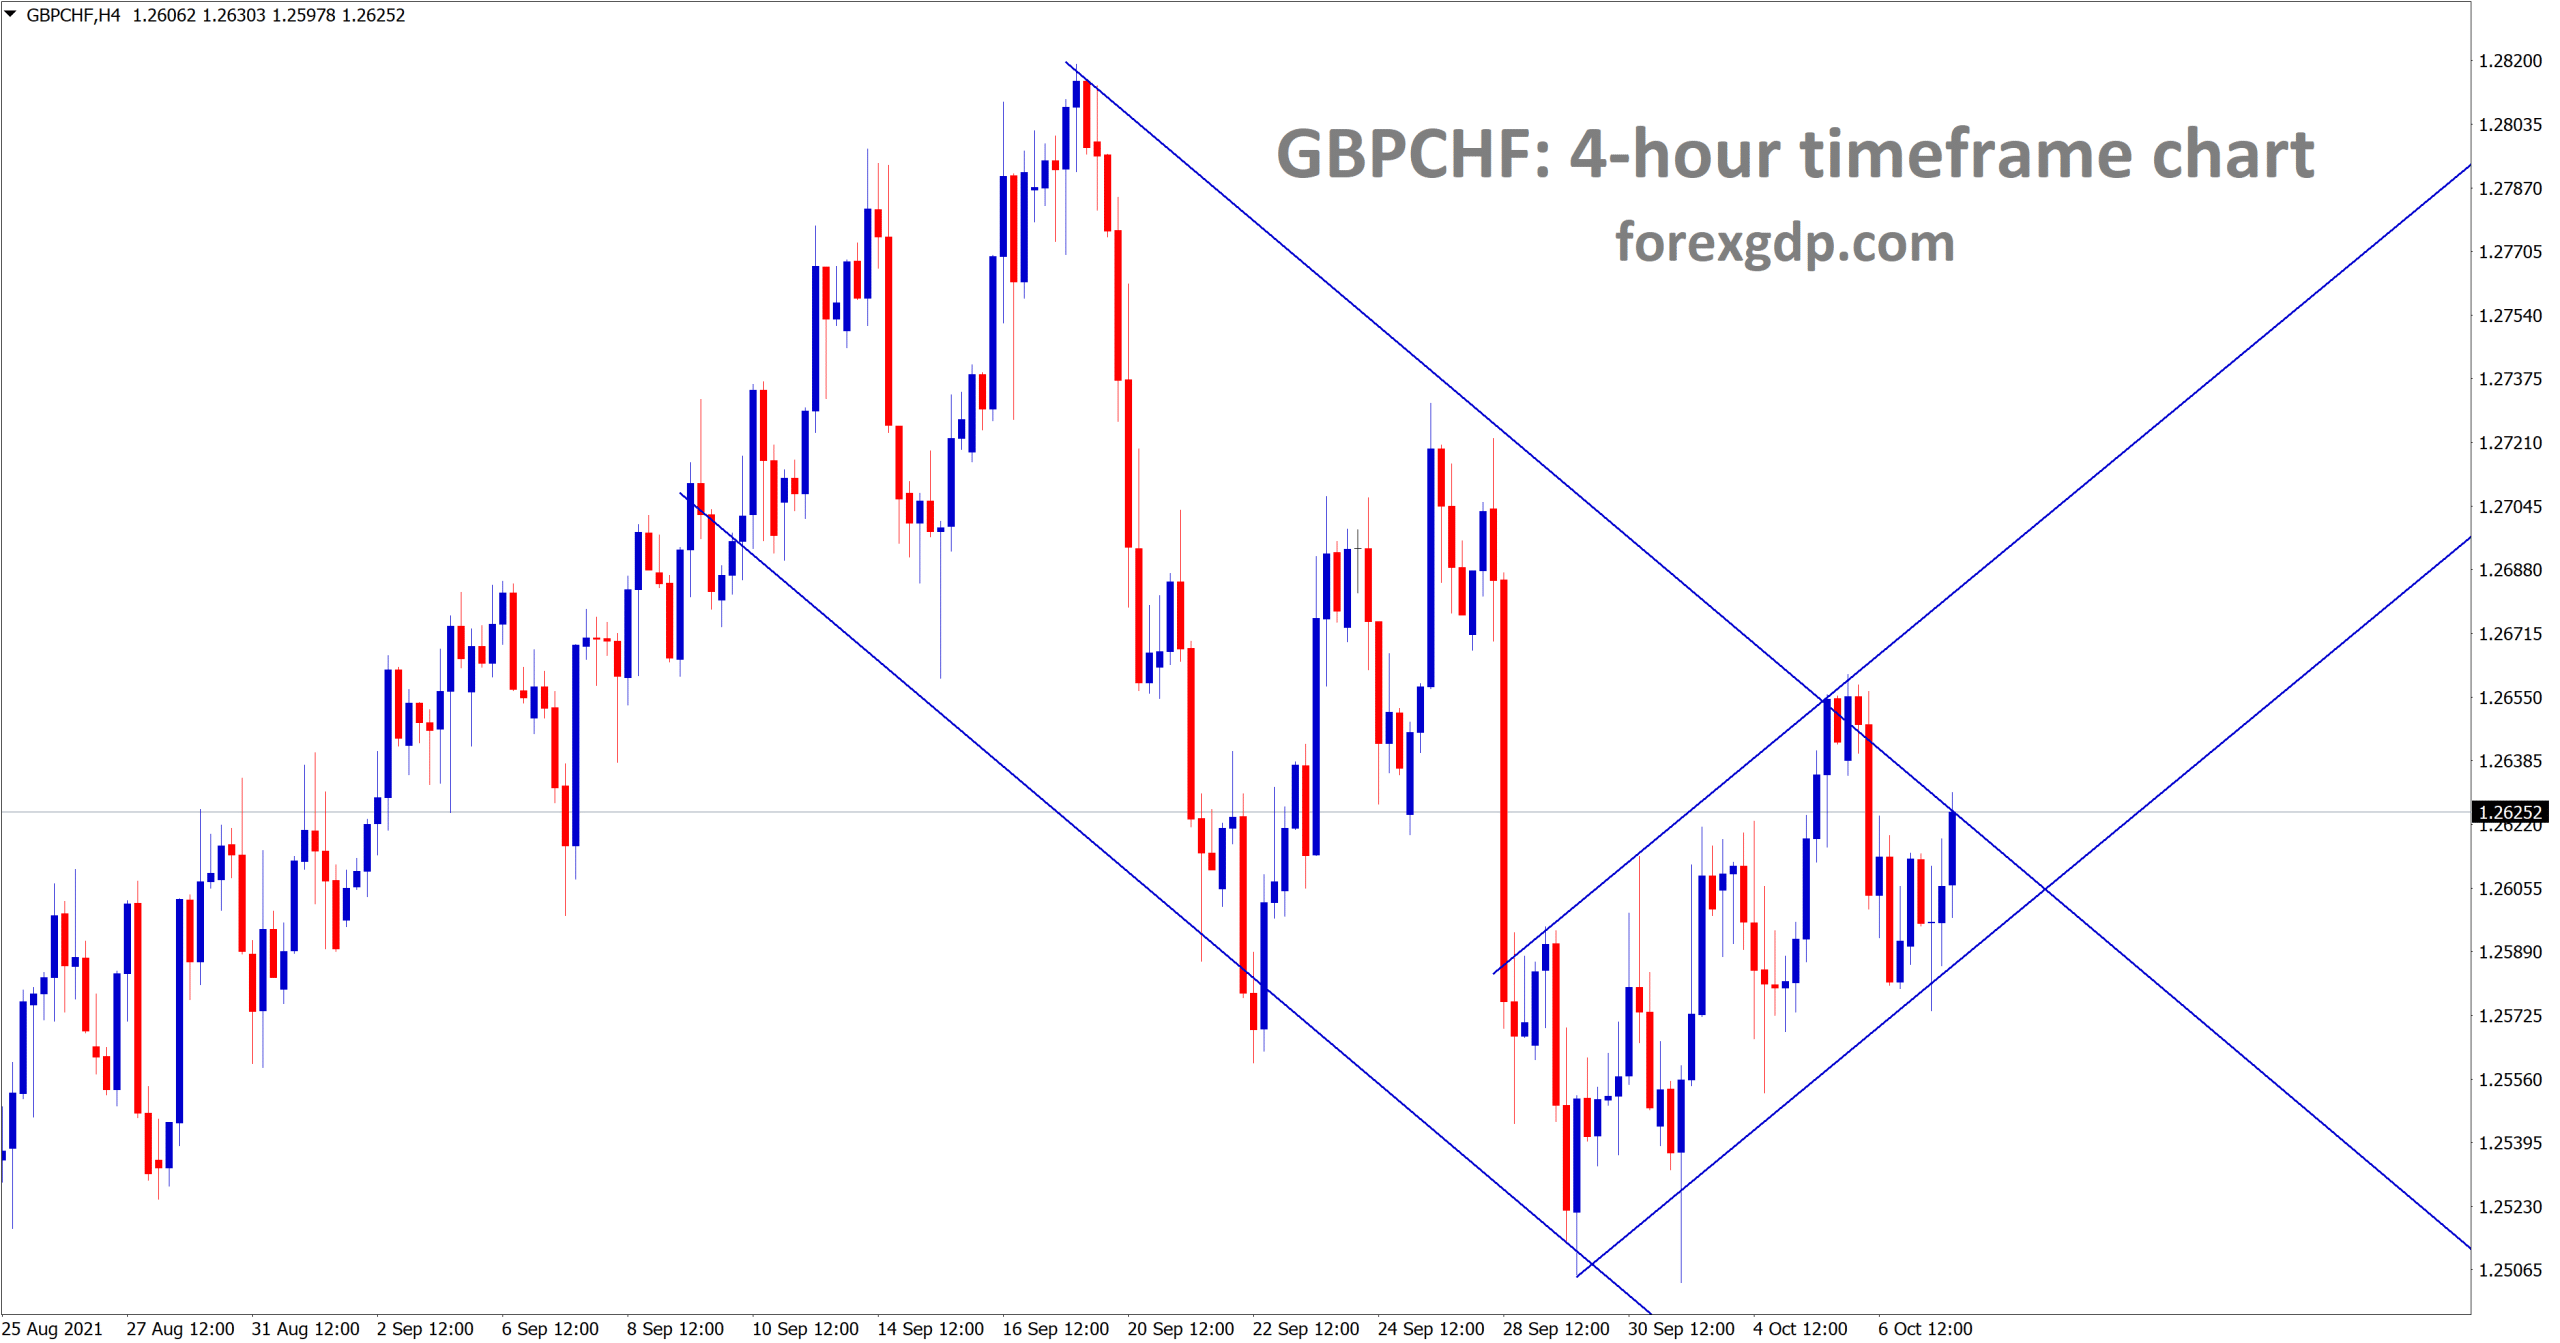 GBPCHF is moving between the channel ranges